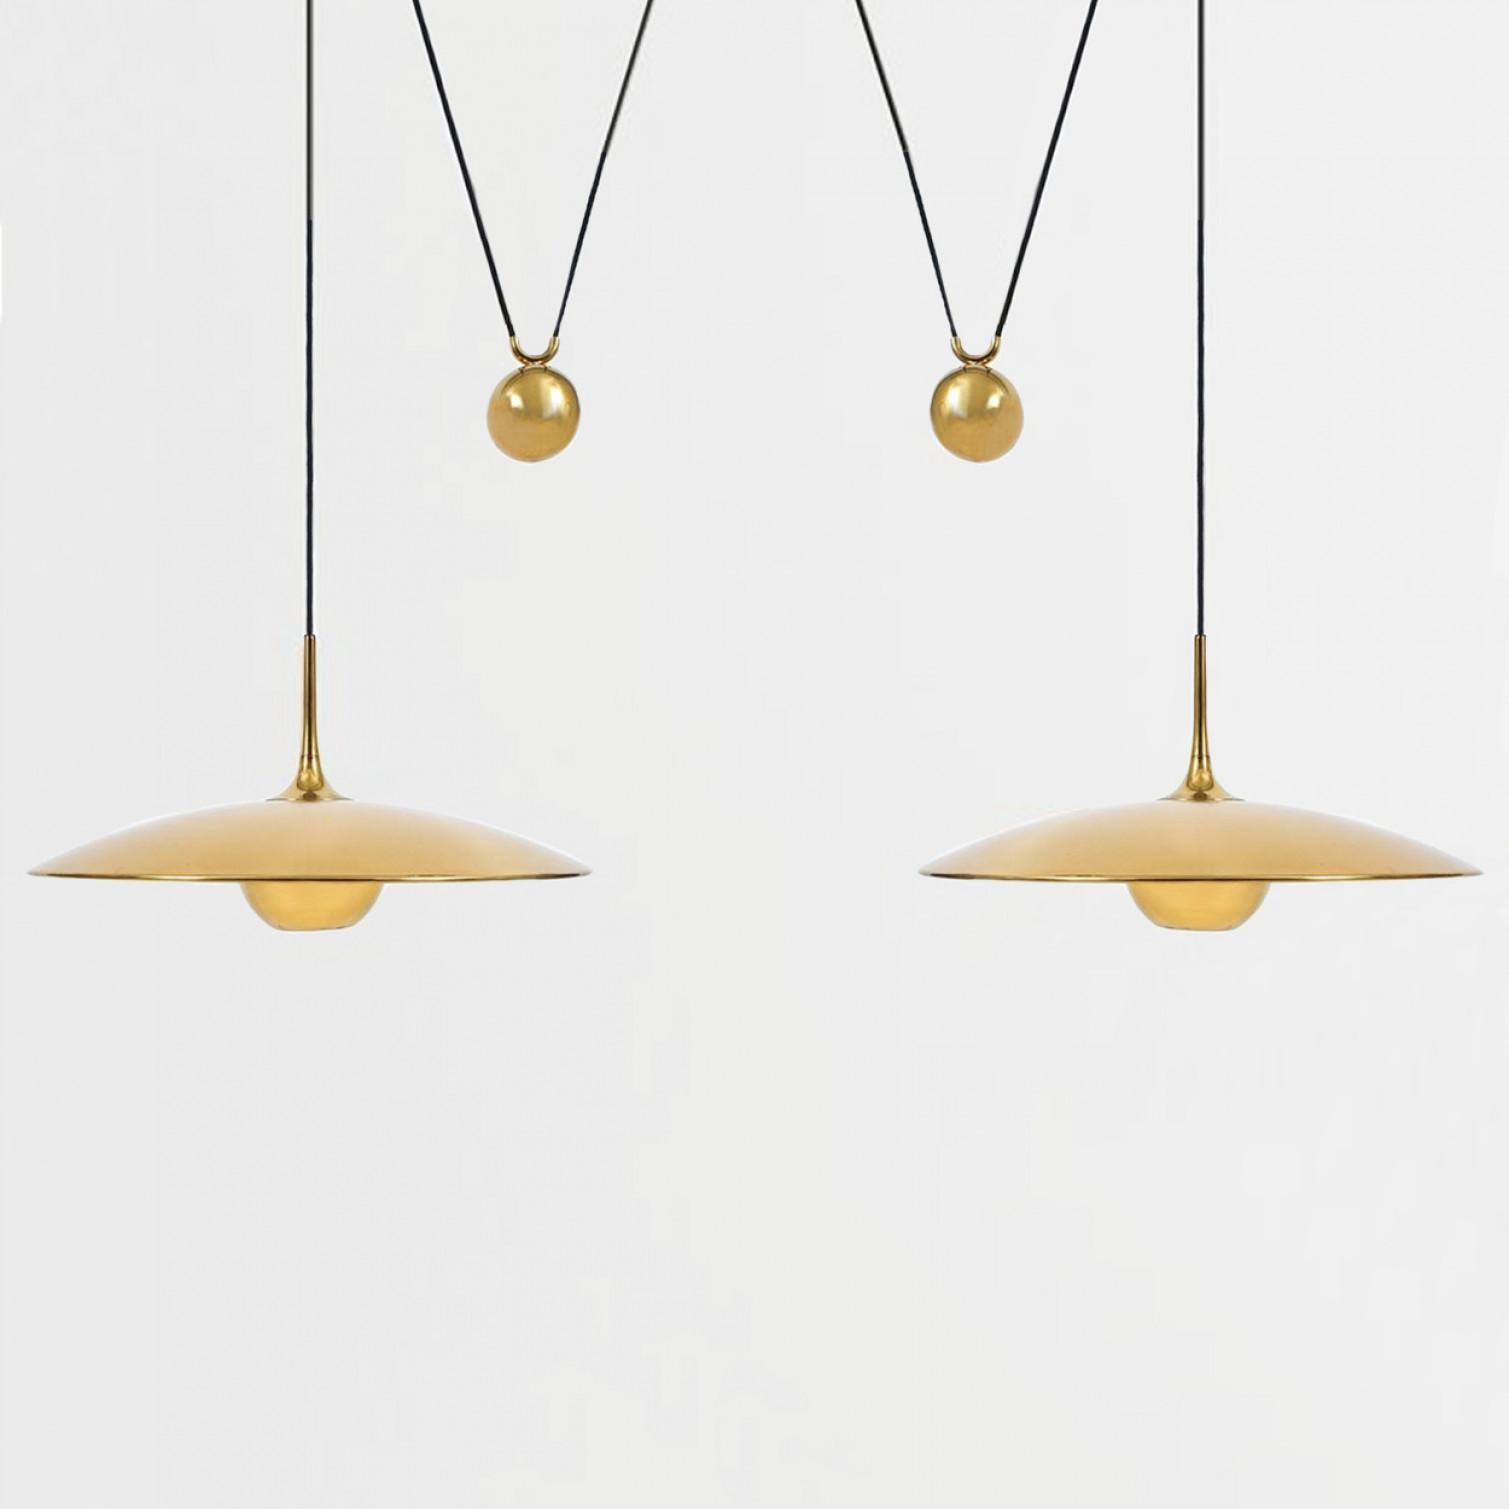 Modern Onos 55 Double Pull Brass Pendant Lamp by Florian Schulz, Germany